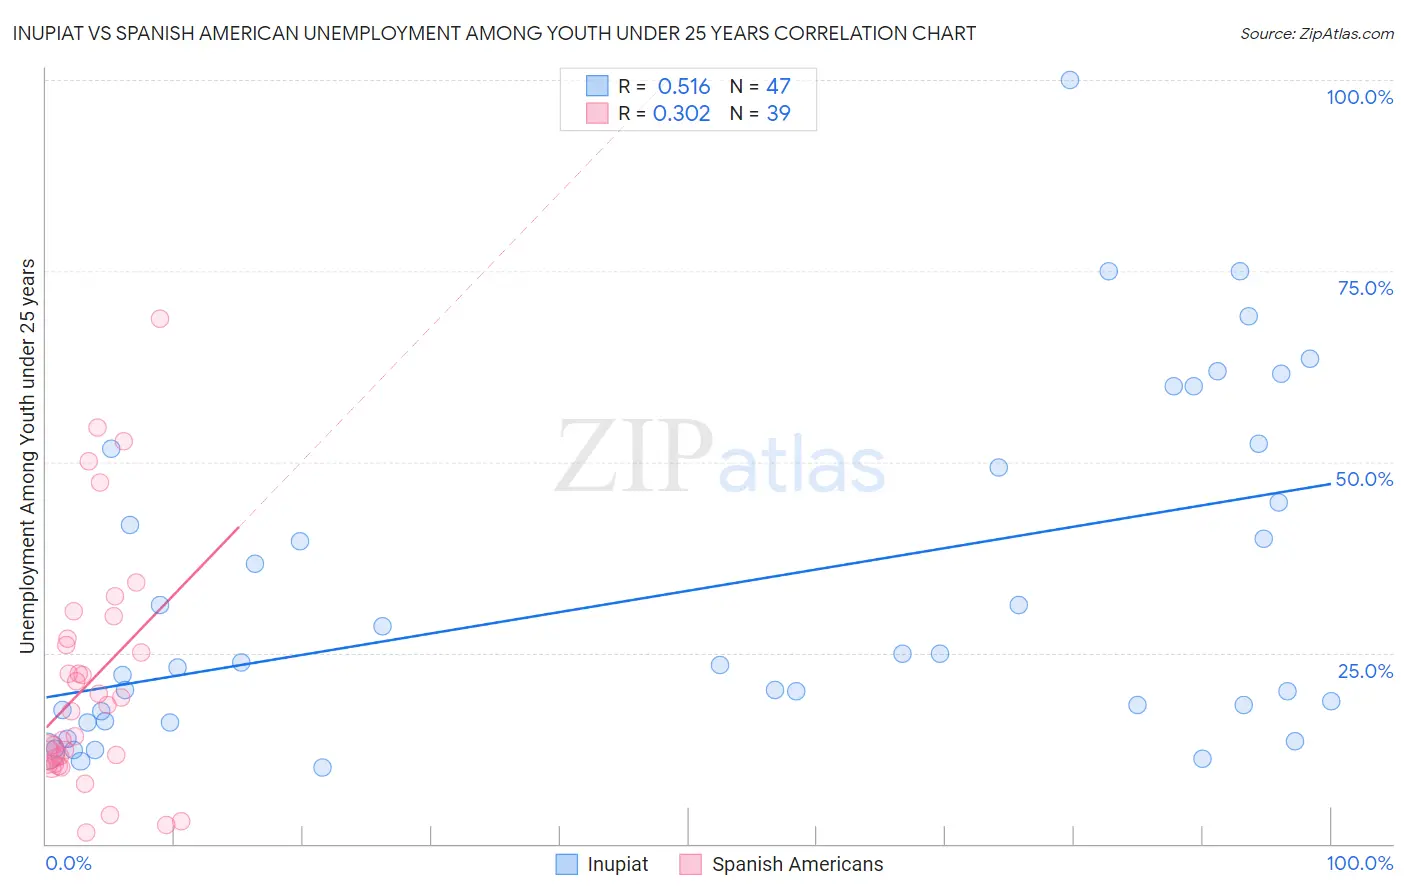 Inupiat vs Spanish American Unemployment Among Youth under 25 years